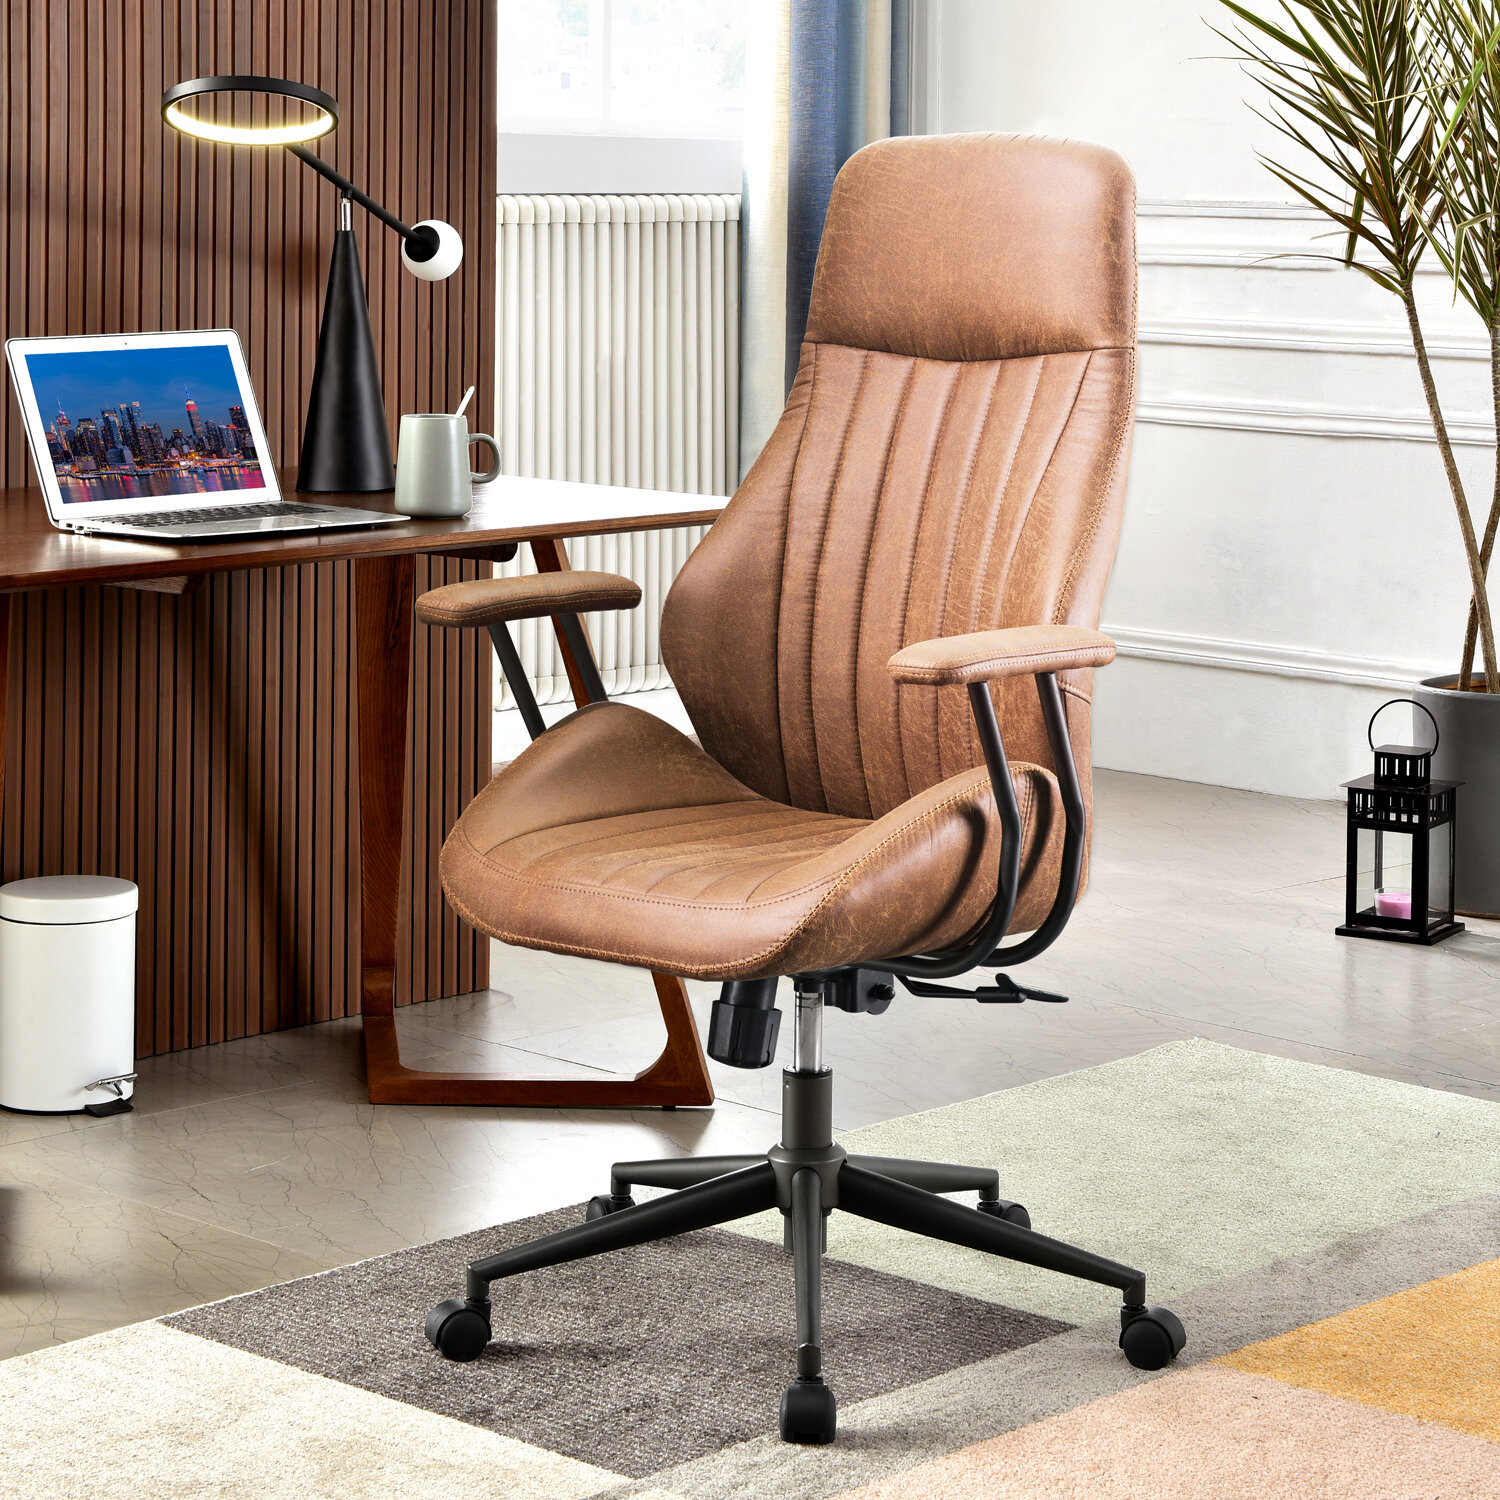 Camel Color Office Chair - It showcases a modified wingback design with